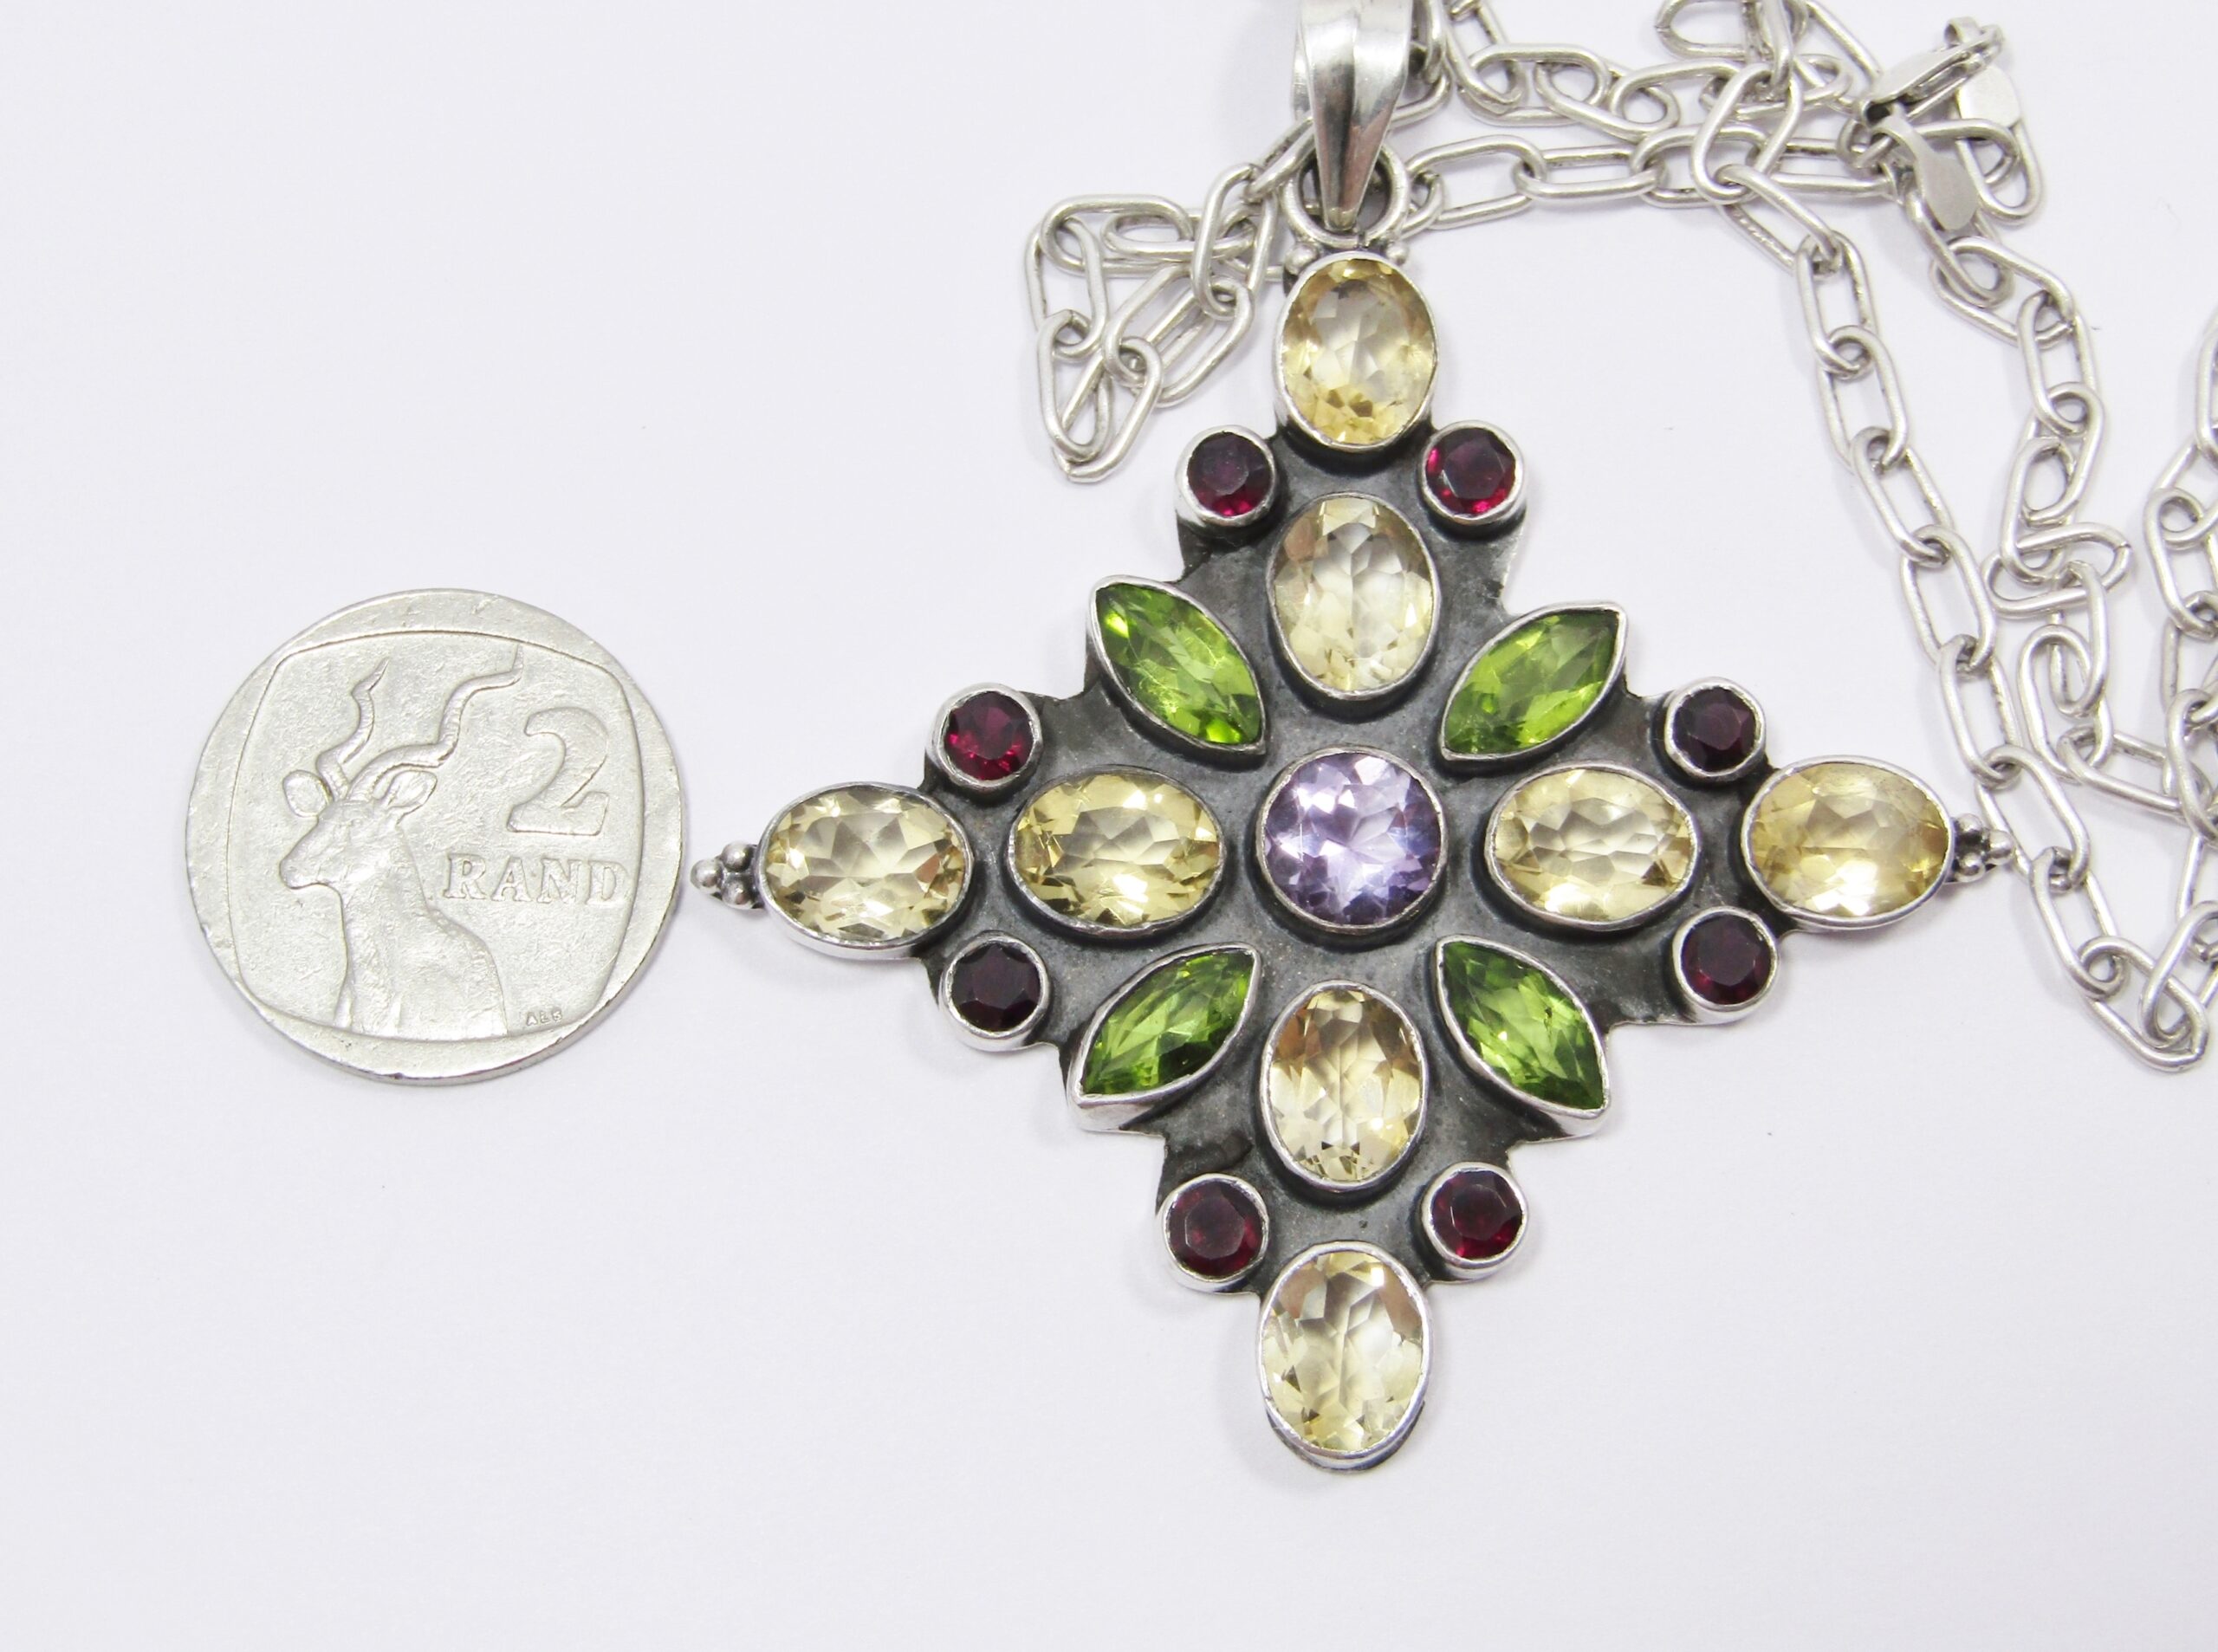 A Gorgeous Huge Gemstone Pendant on Chain in Sterling Silver